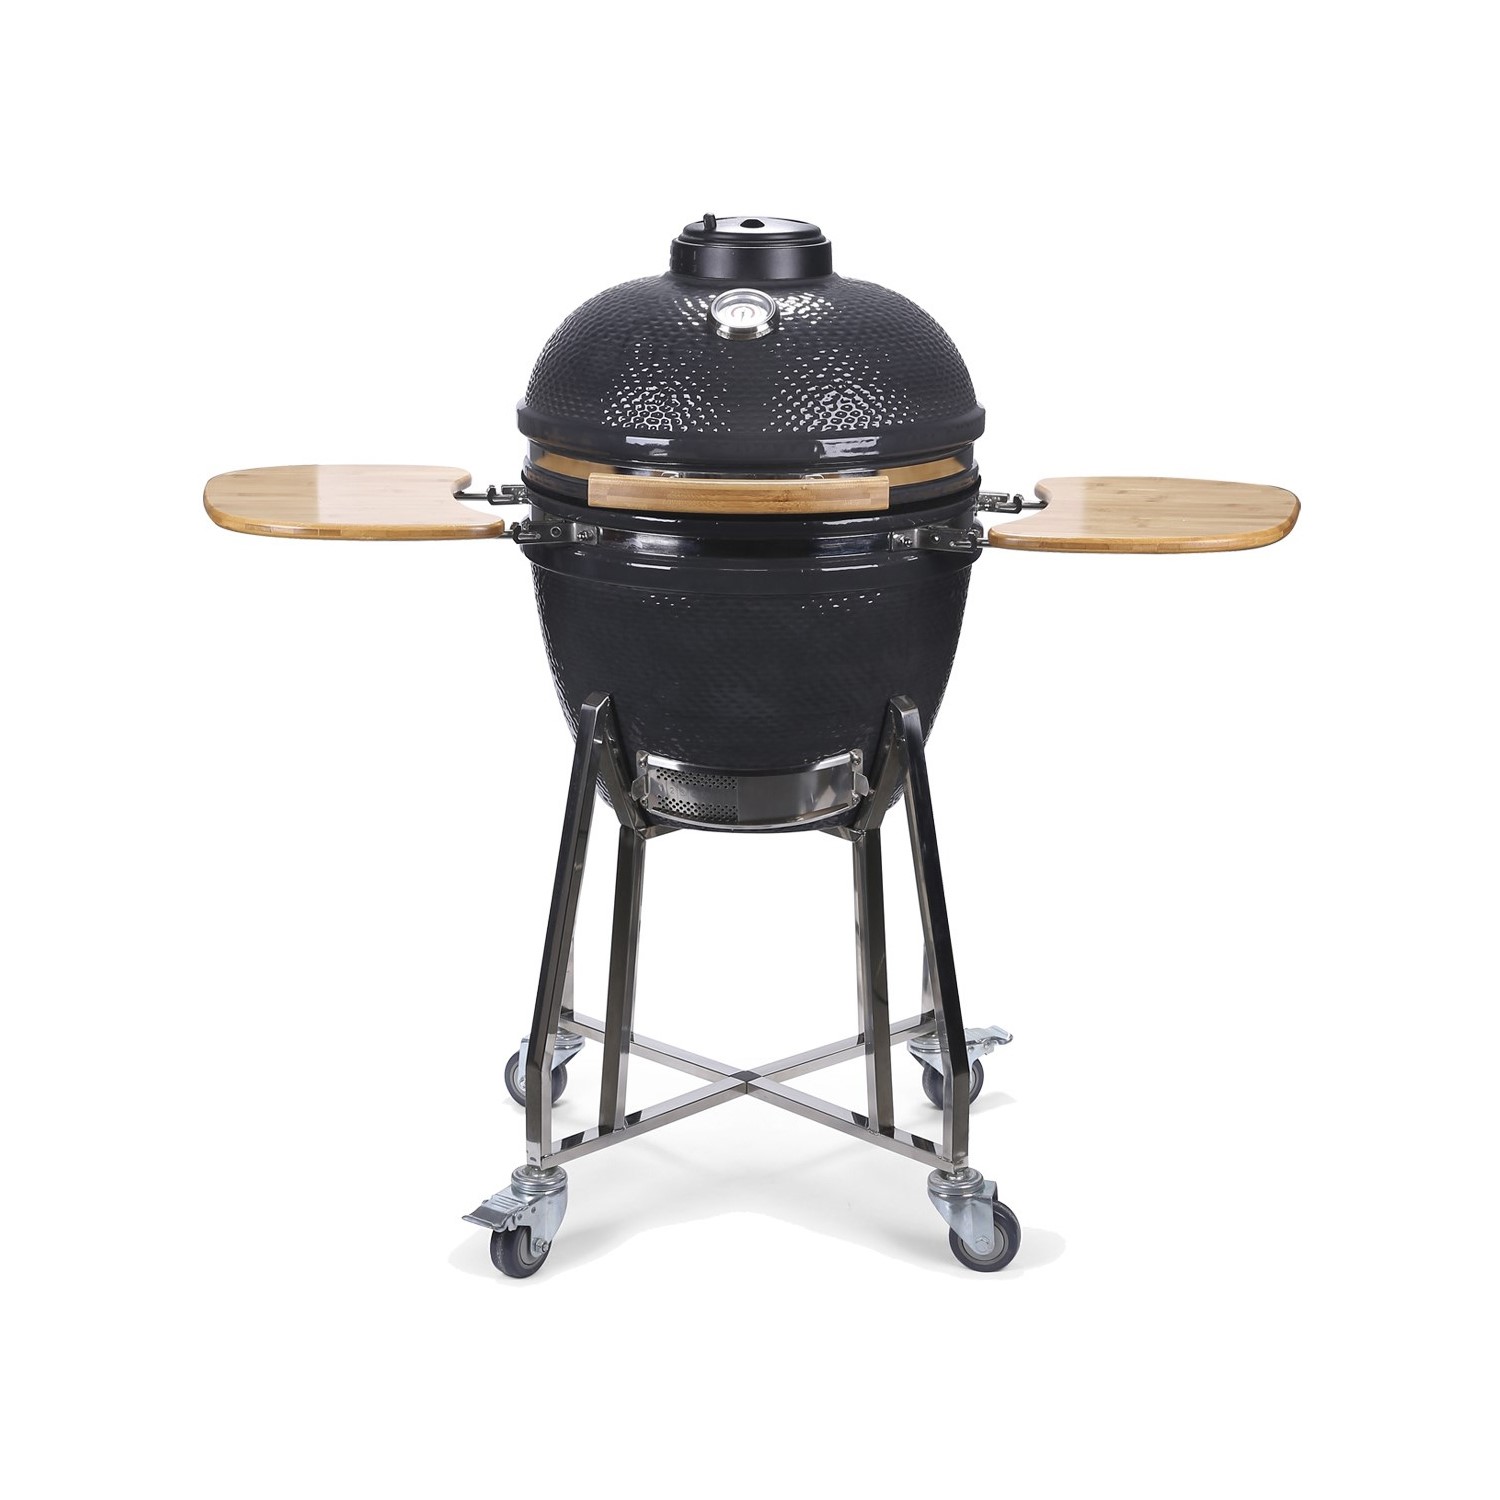 Boss Grill The Egg XL - 22 Inch Ceramic Kamado Style Charcoal Egg BBQ Grill - Grey